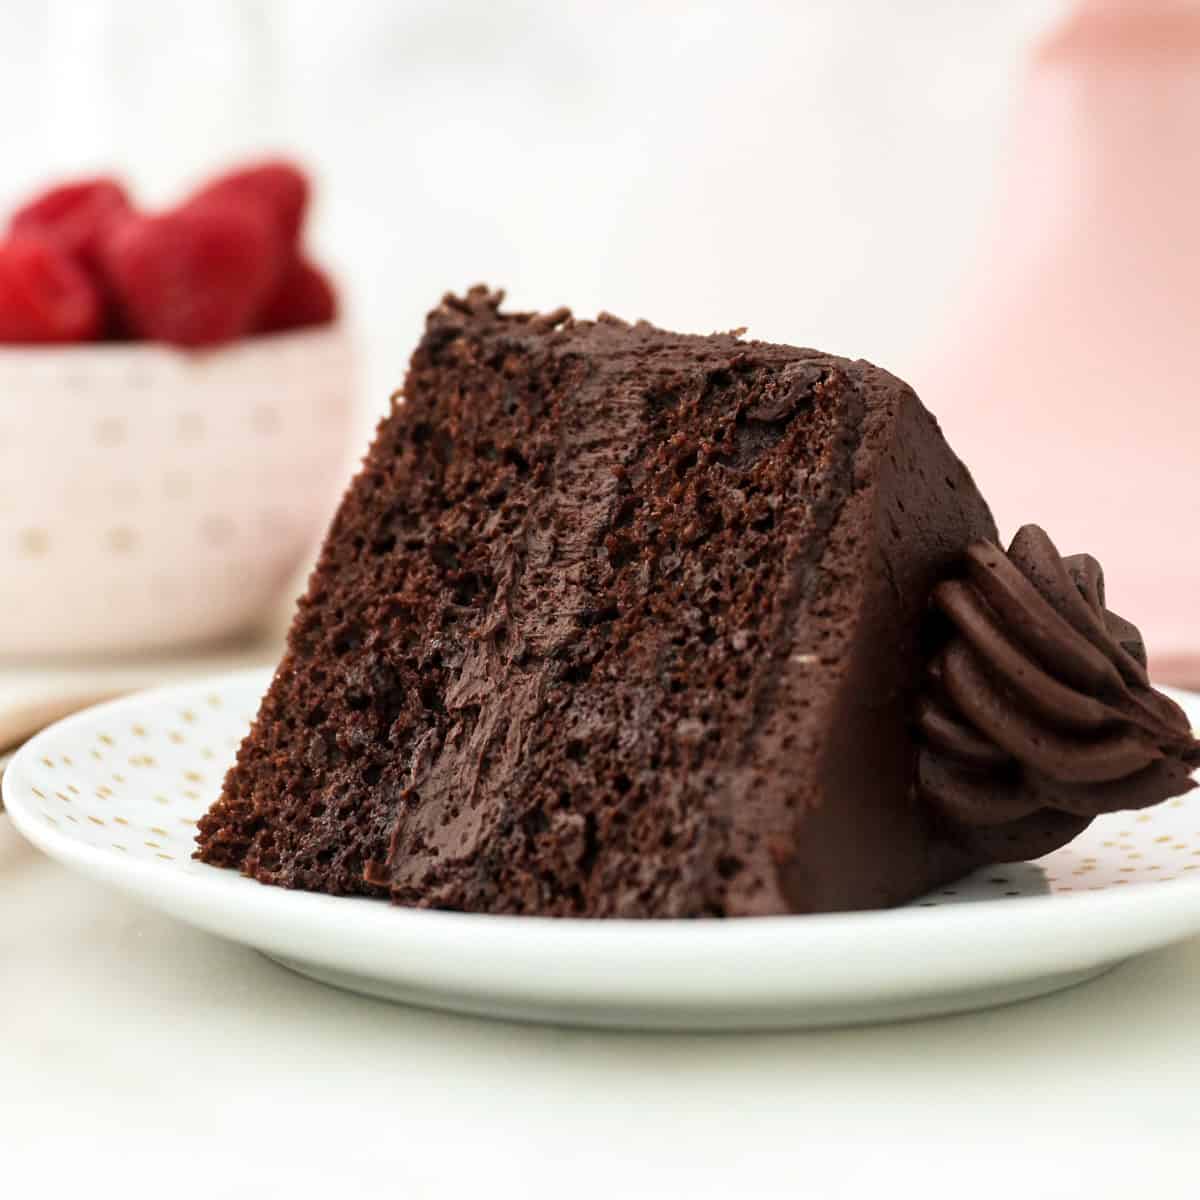 Chocolate cake for two (small chocolate cake) - FLOURS & FROSTINGS